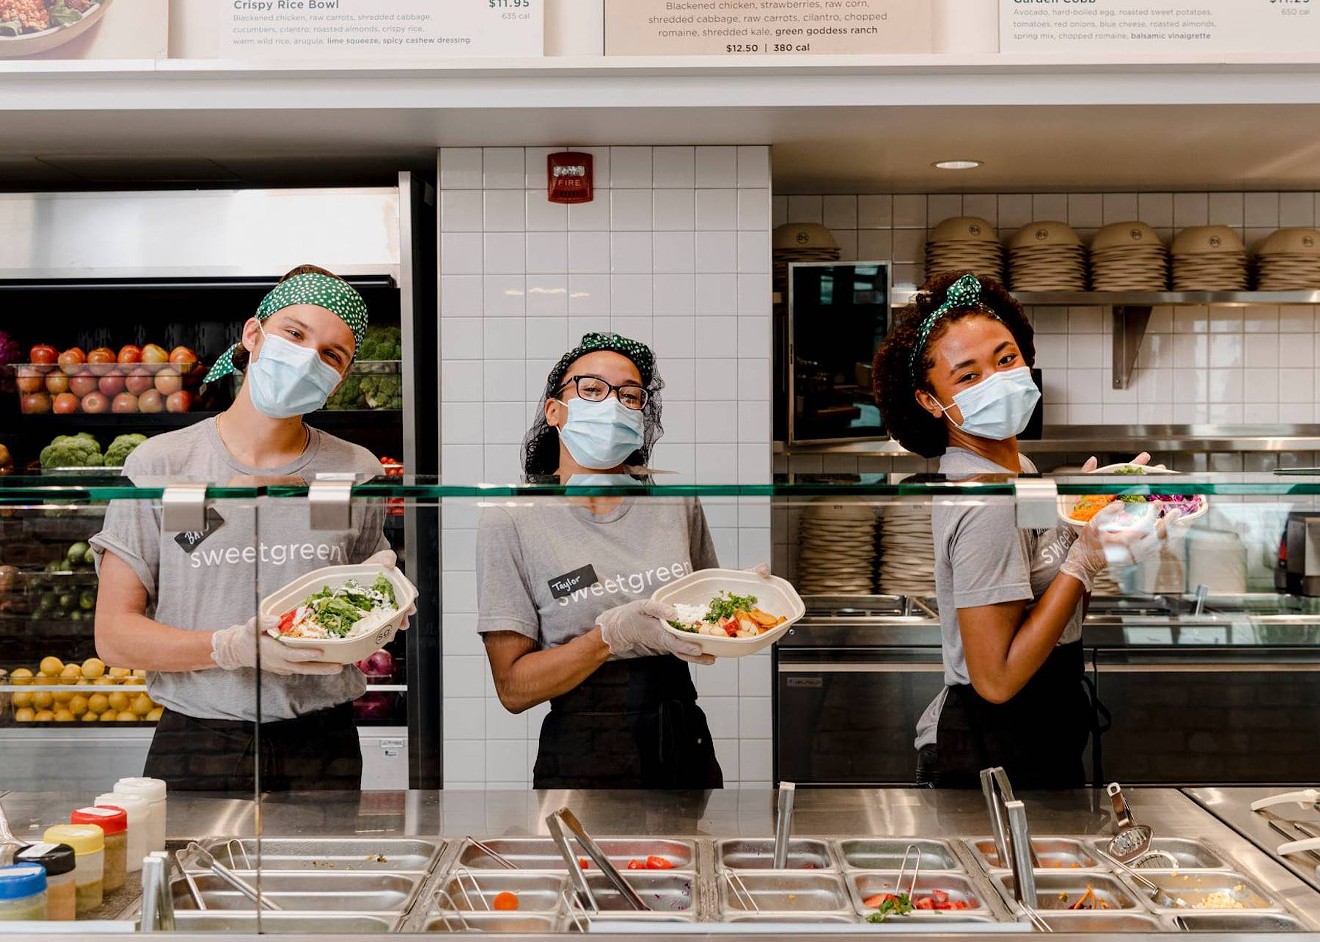 Sweetgreen, a healthy fast-casual restaurant, will open four locations in Miami.